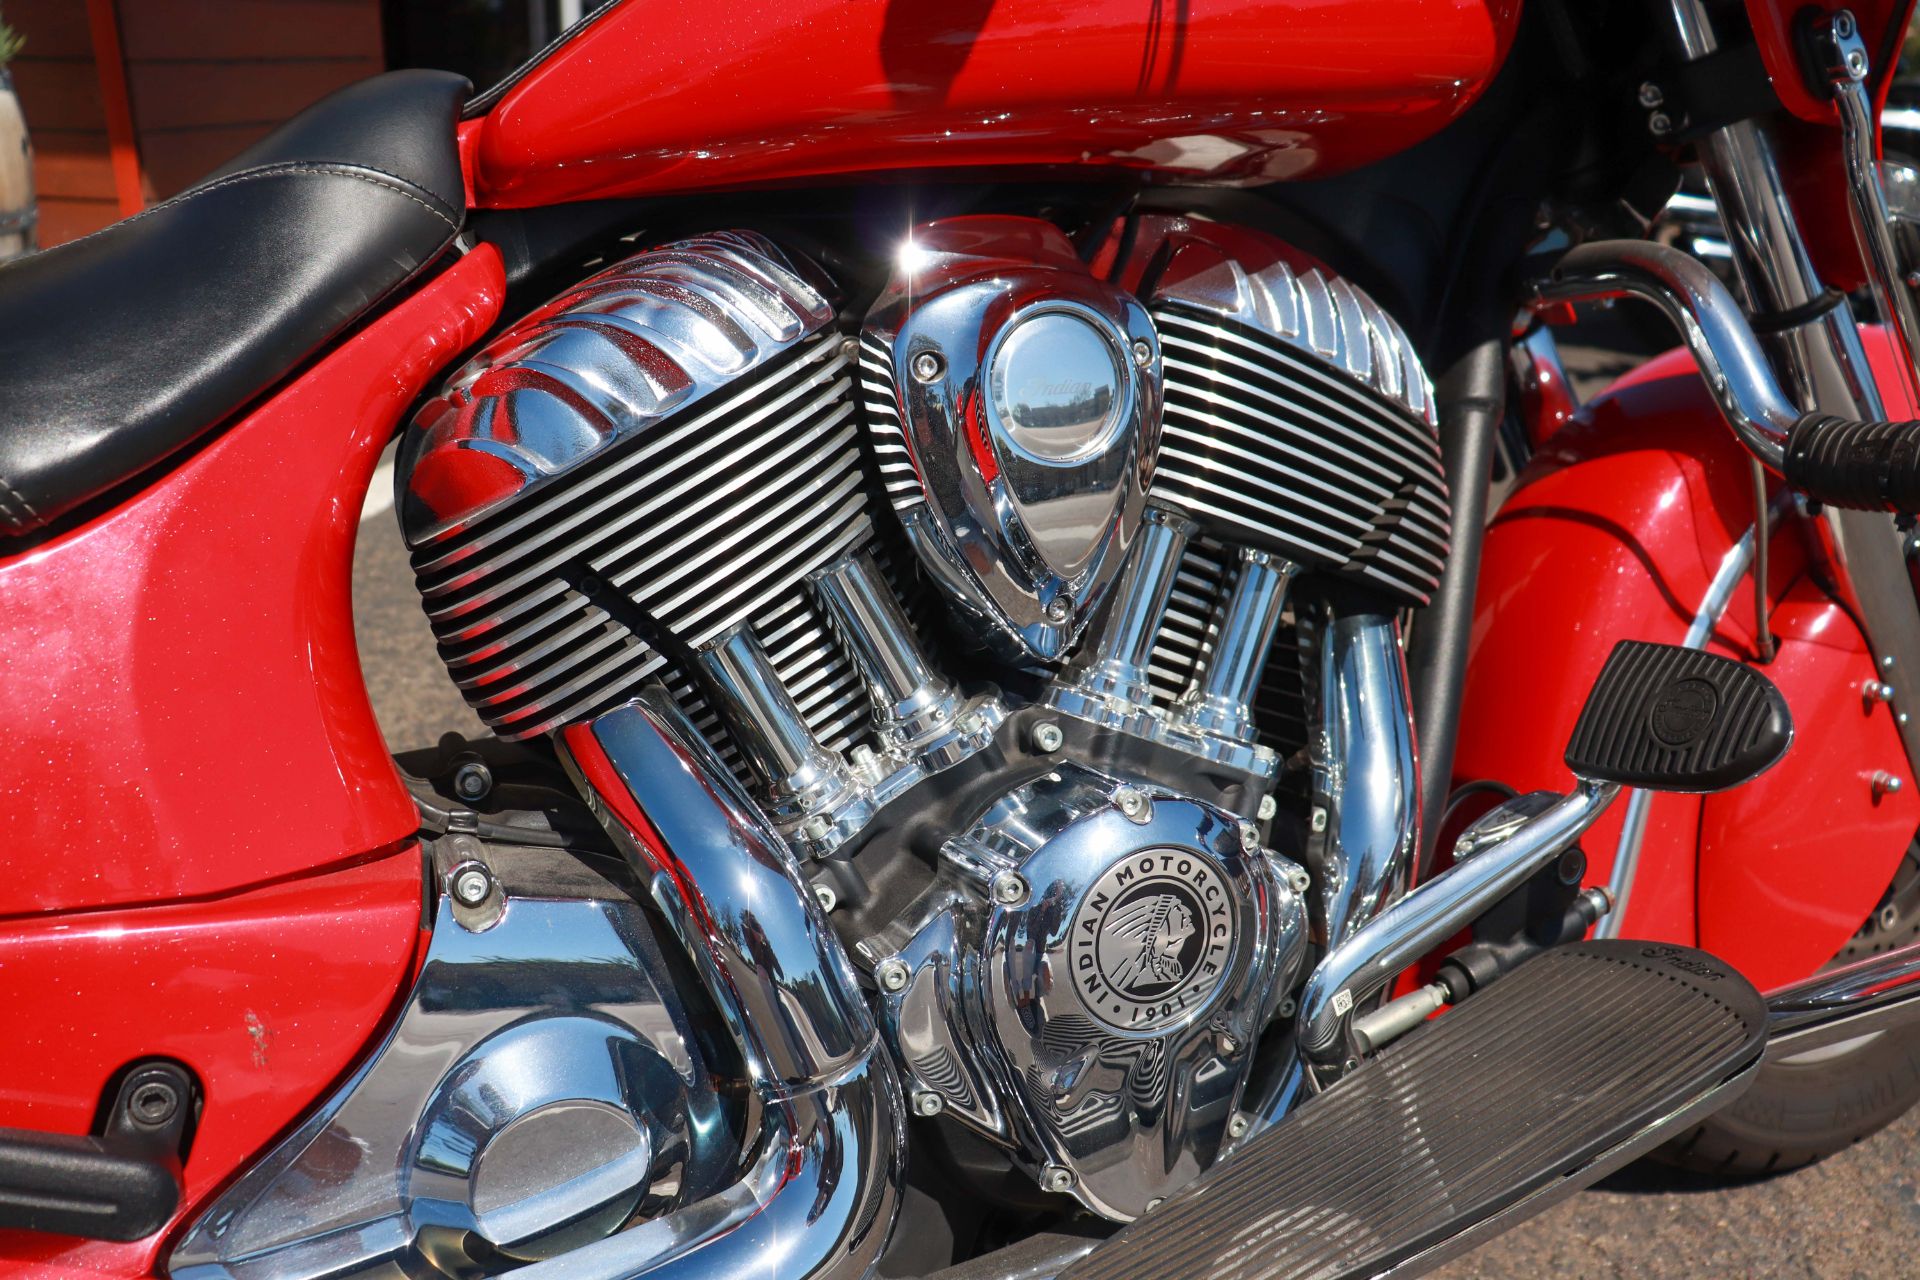 2019 Indian Chieftain® Classic Icon Series in San Diego, California - Photo 2